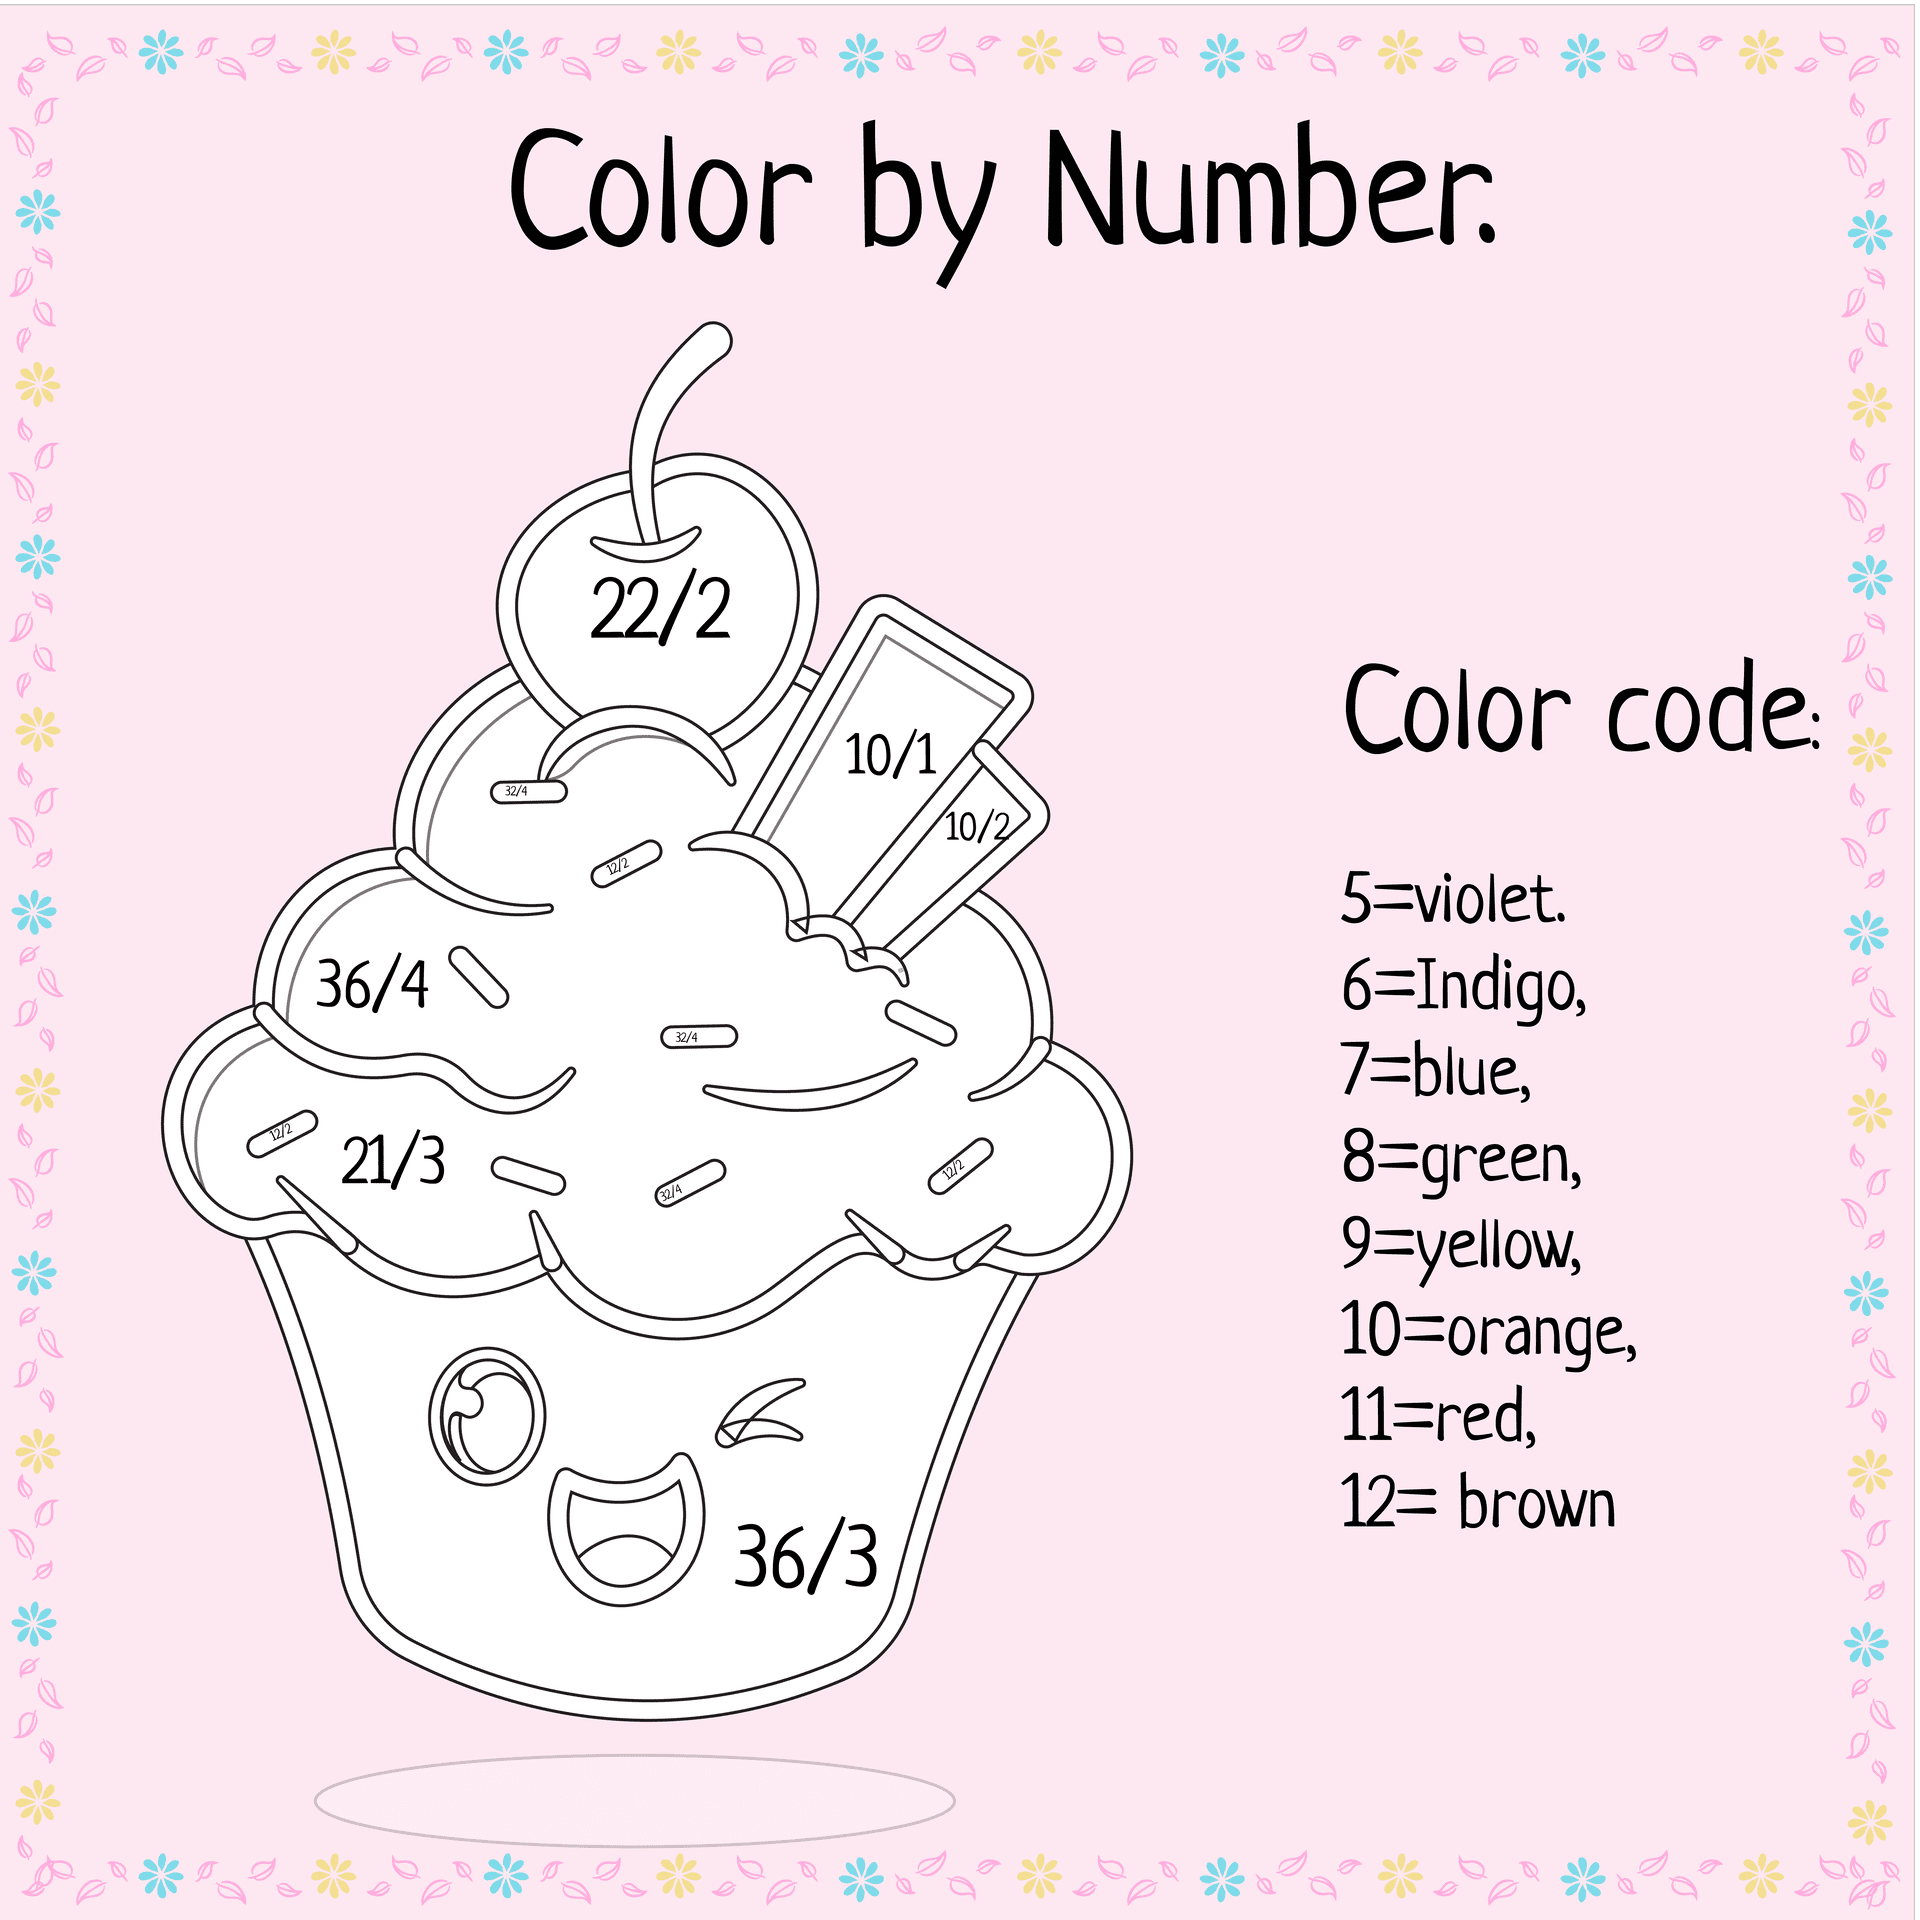 Divide and color the cupcake in Easter coloring math worksheets